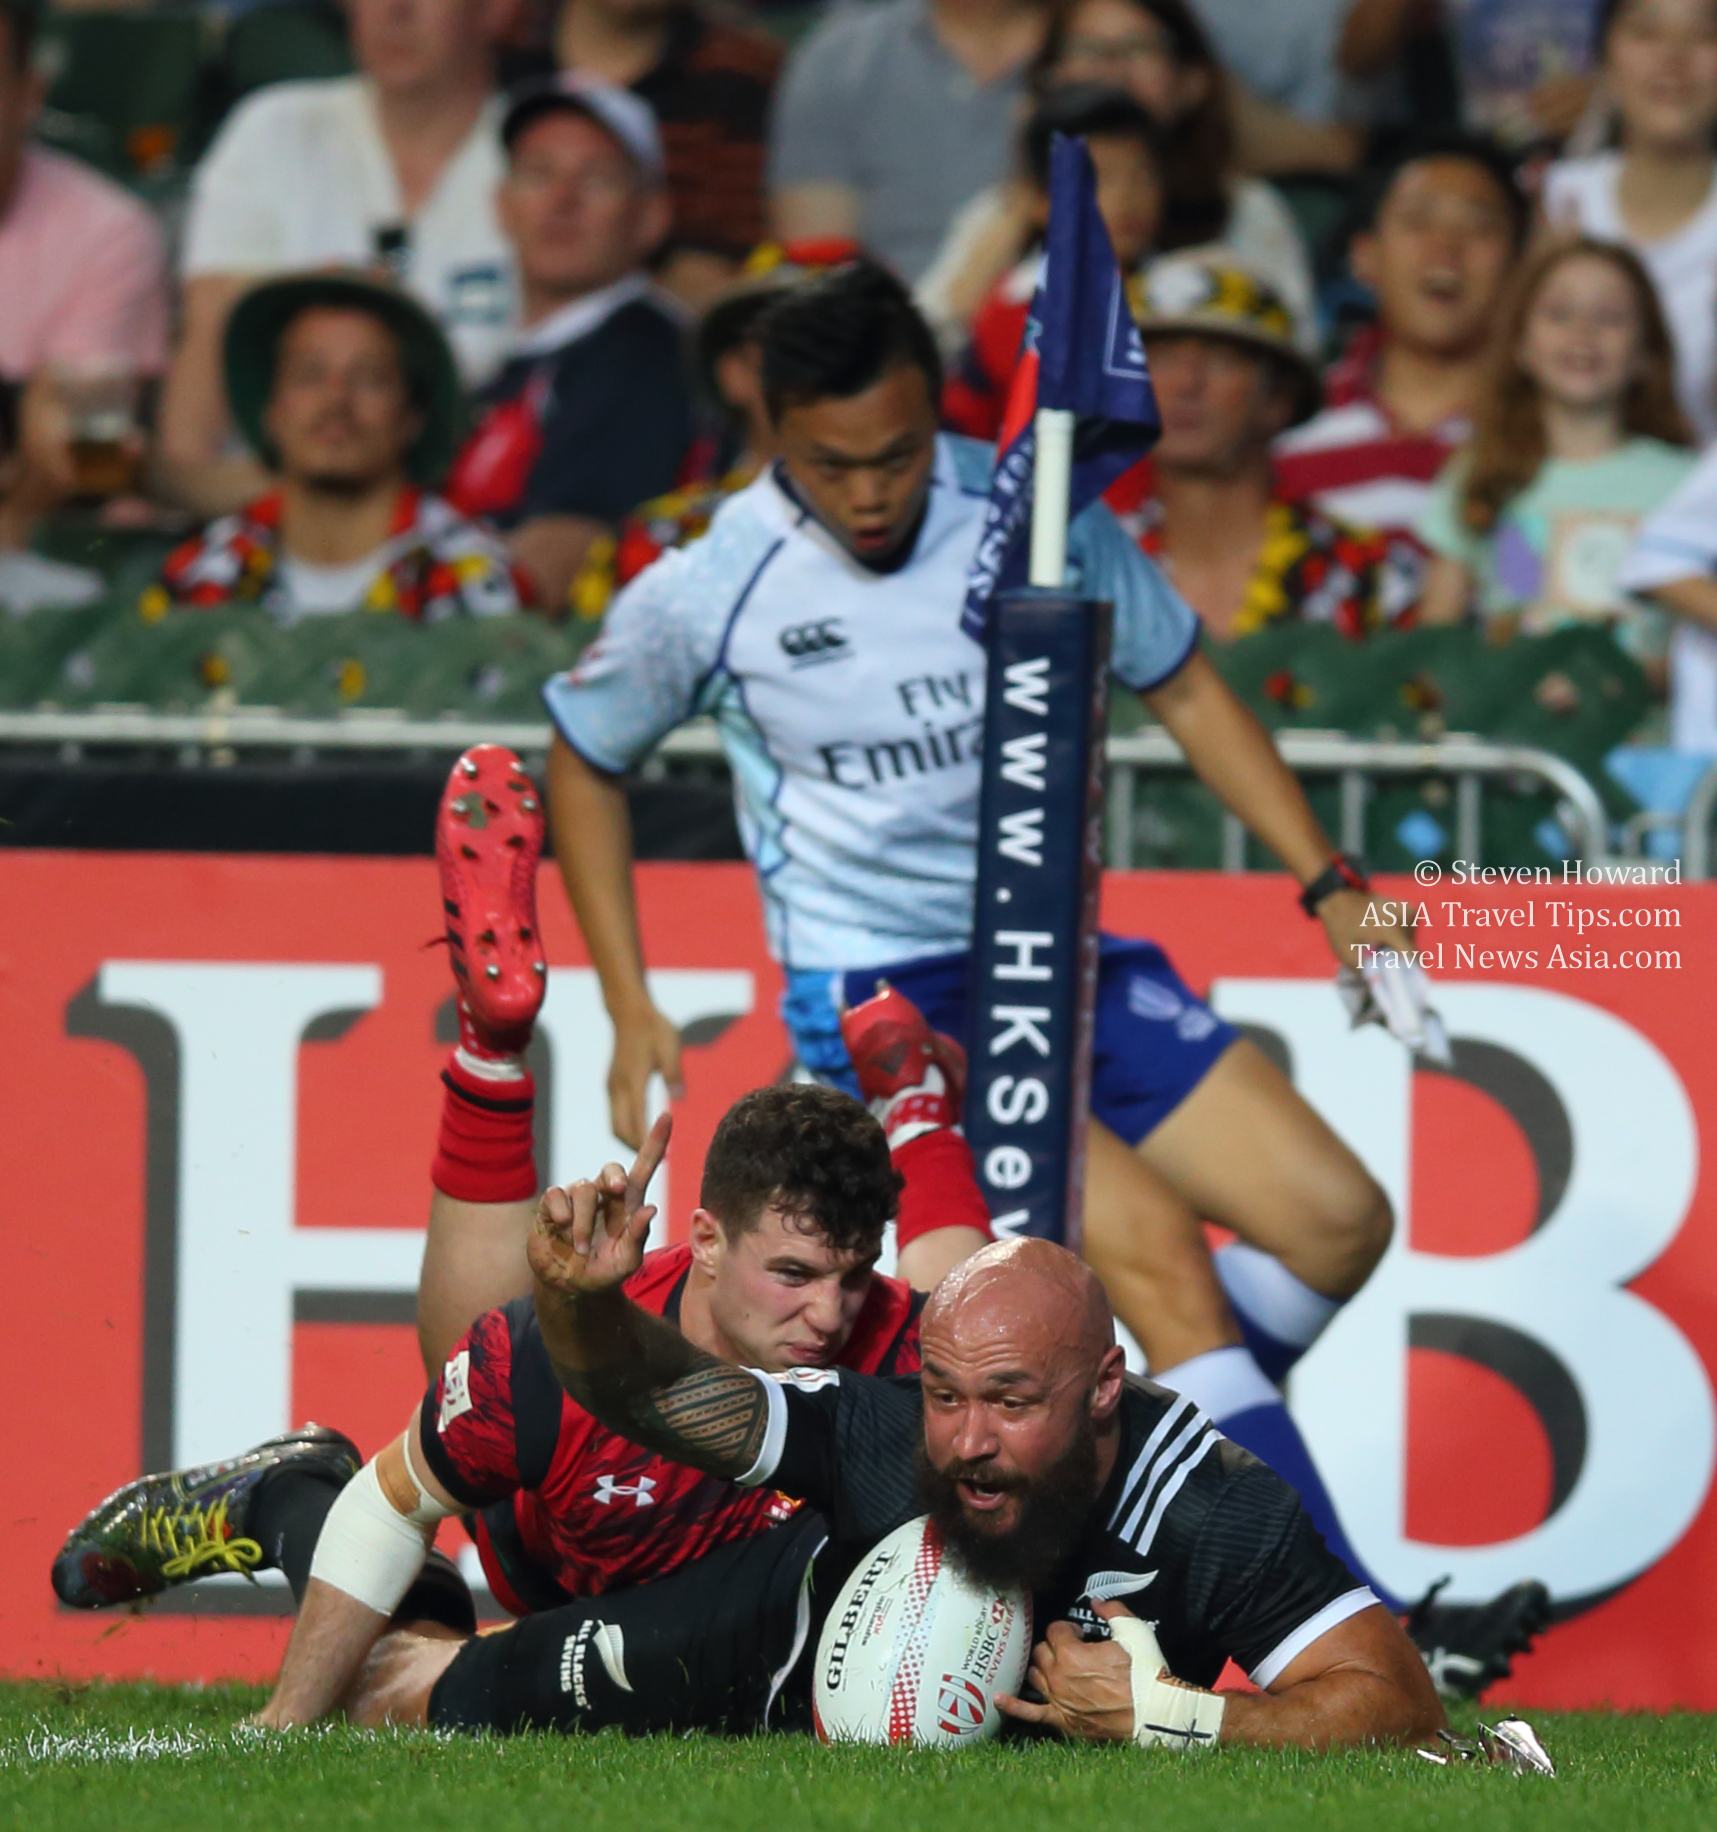 Action from 2017 Cathay Pacific / HSBC Hong Kong Sevens. Picture by Steven Howard. Click to enlarge.